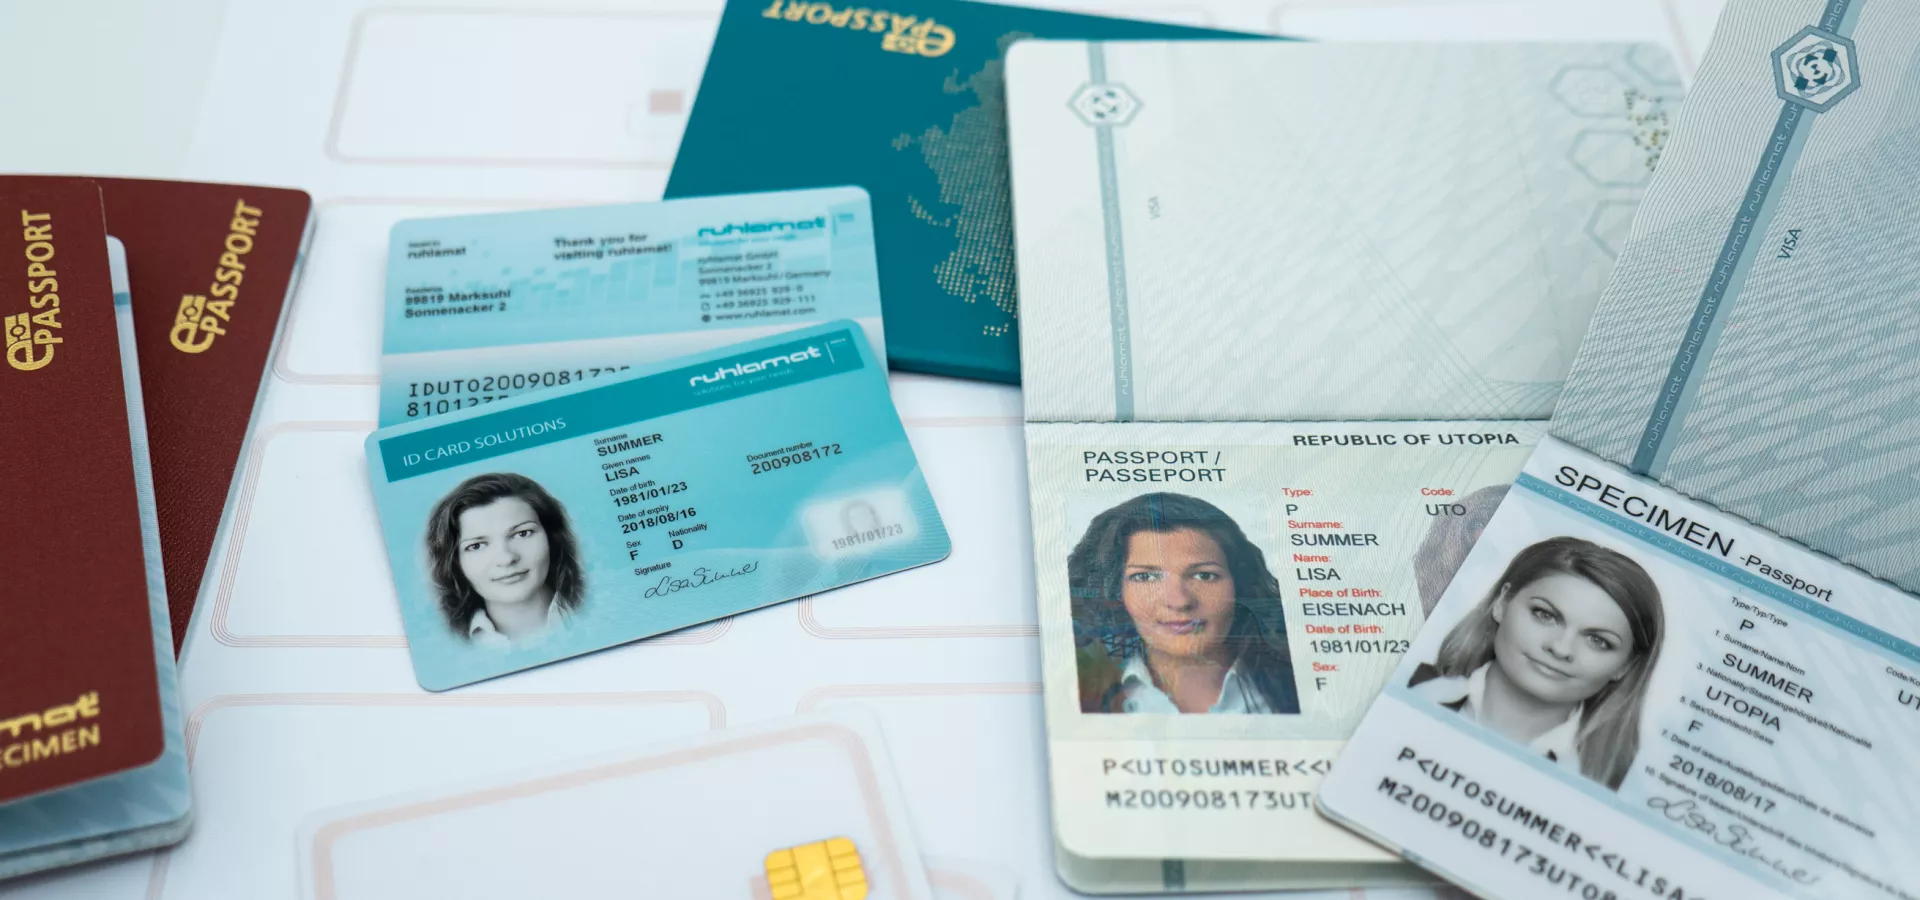 Card and Passport Systems